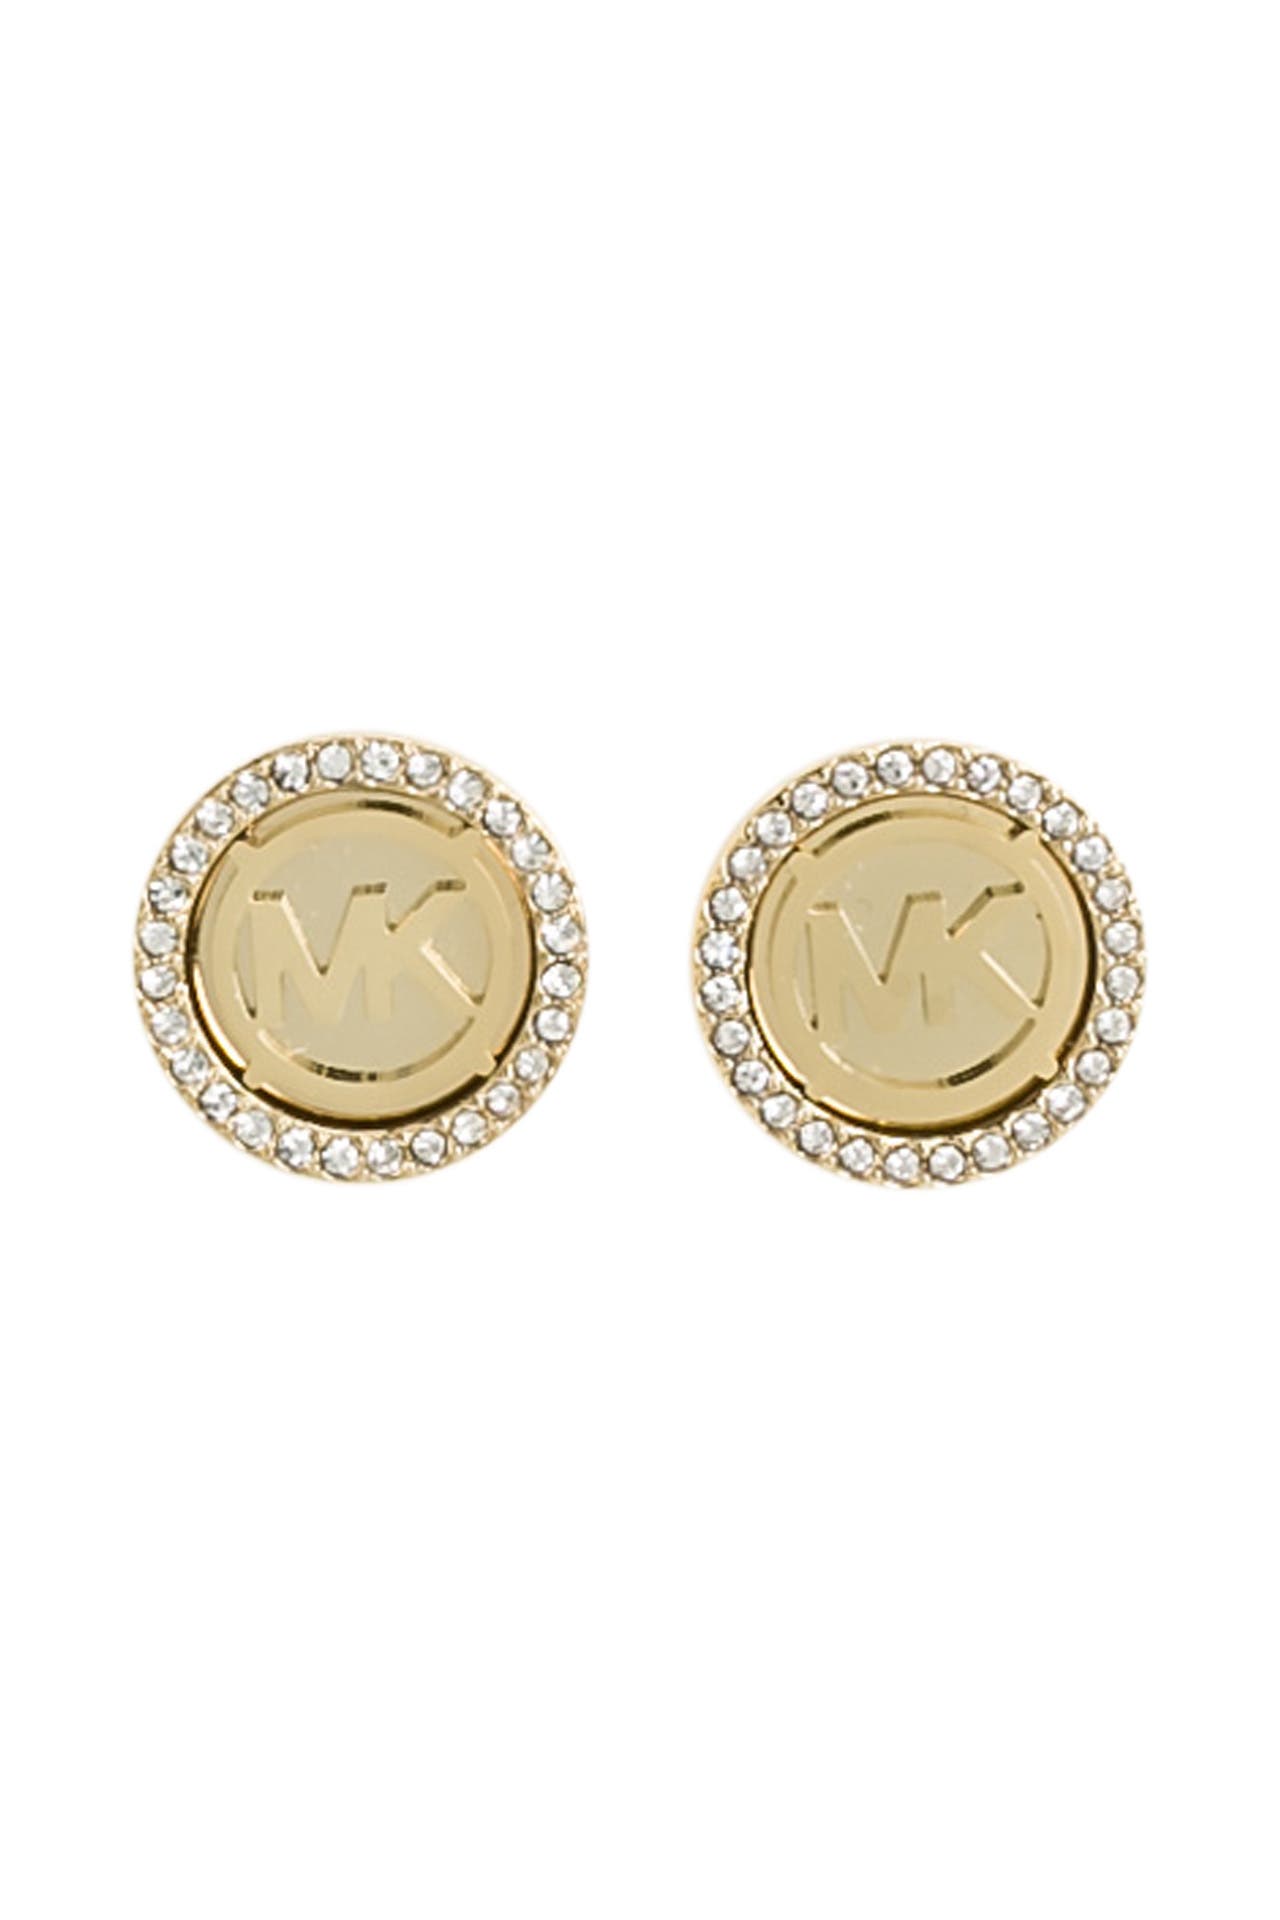 Michael Kors Crystal Heart Studs Earrings Gold Tone One Size Crystal   Amazoncouk Fashion